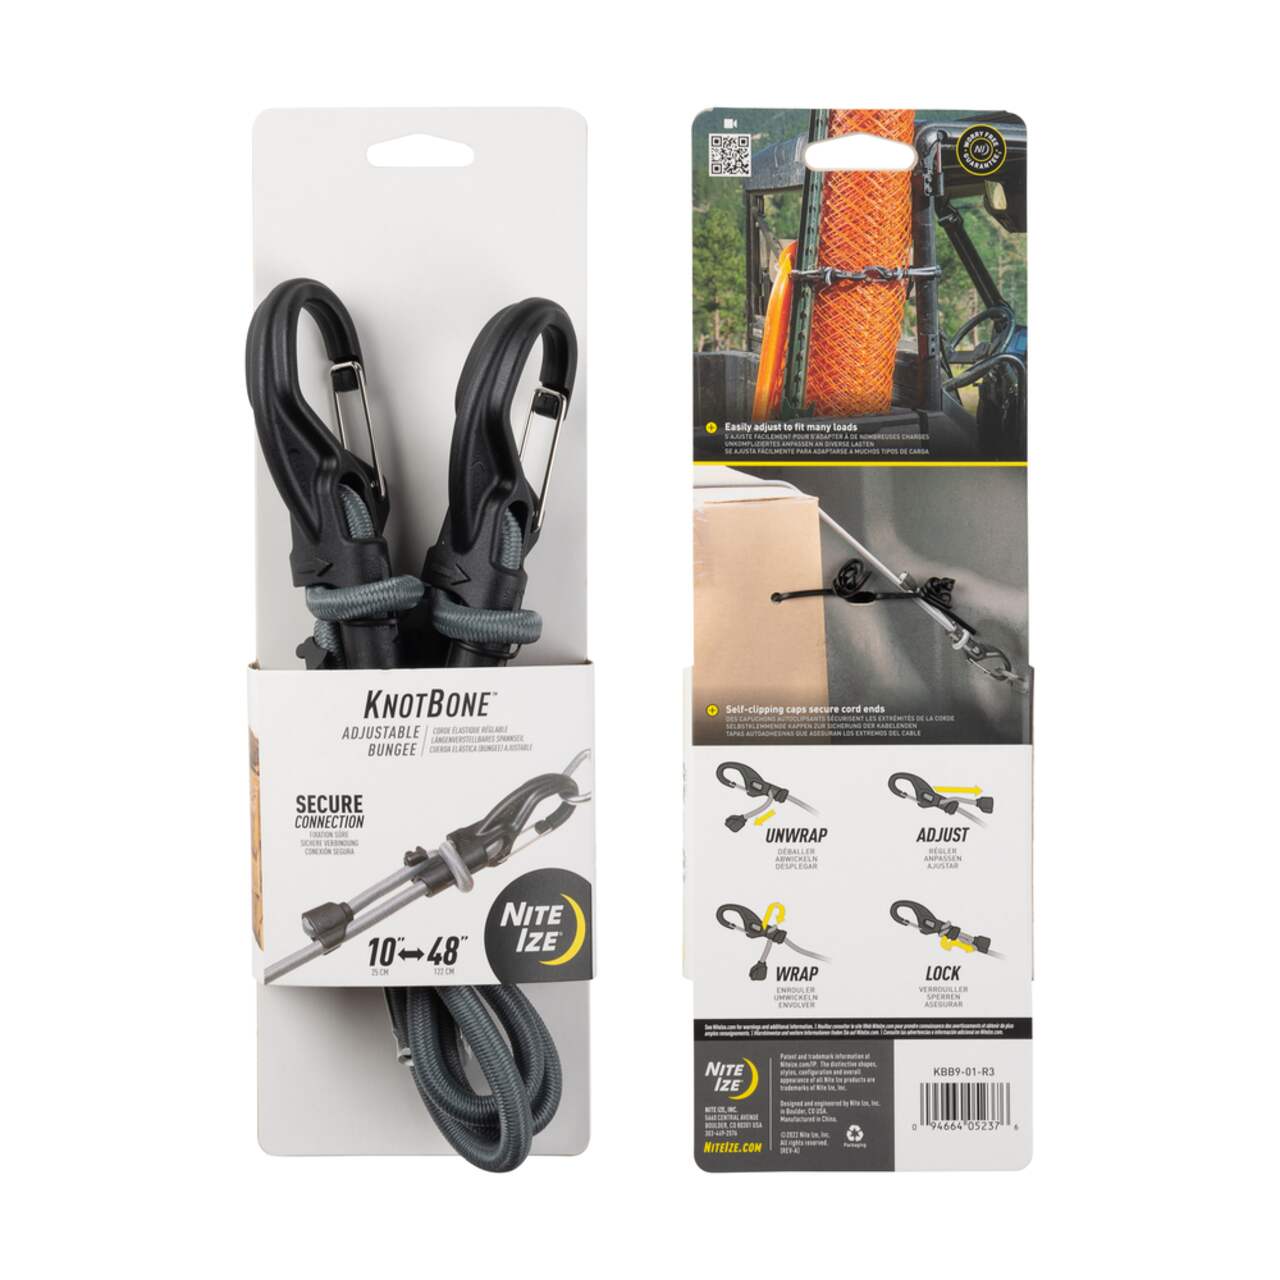 https://media-www.canadiantire.ca/product/playing/camping/camping-accessories/0766488/niteize-knotbone-adjustable-bungee-10-48a--80d6c388-da3a-4a58-9981-1a874c26ae15.png?imdensity=1&imwidth=640&impolicy=mZoom